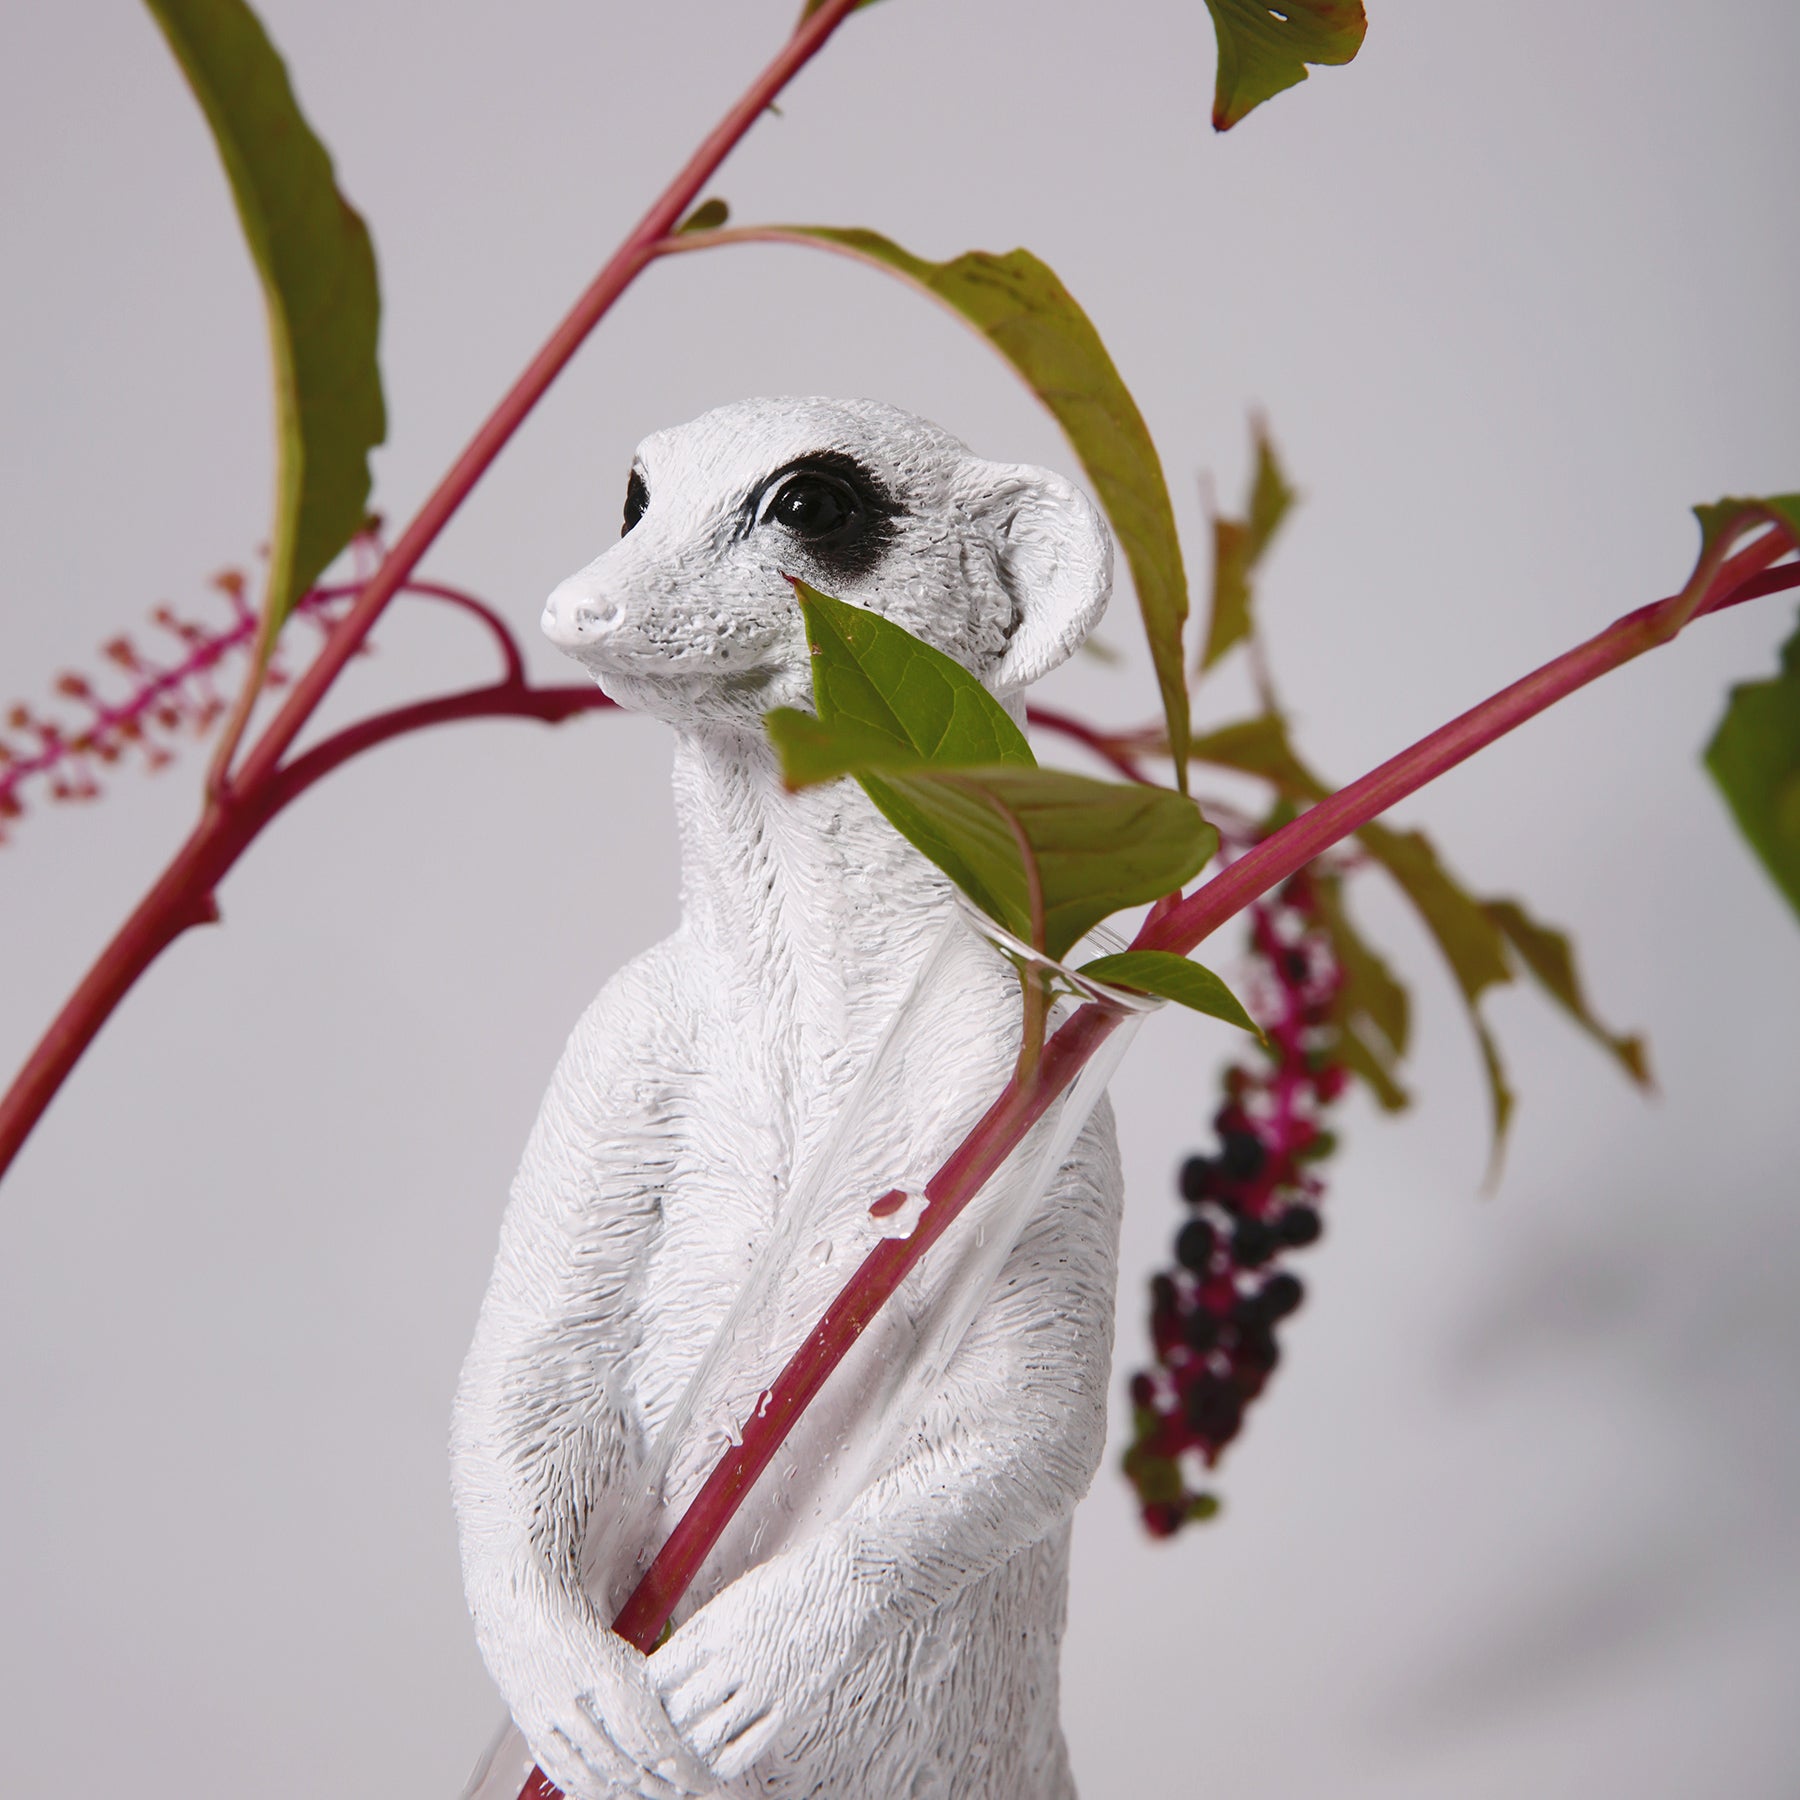 Celebrate the Christmas with Meerkats ornament & figurines!